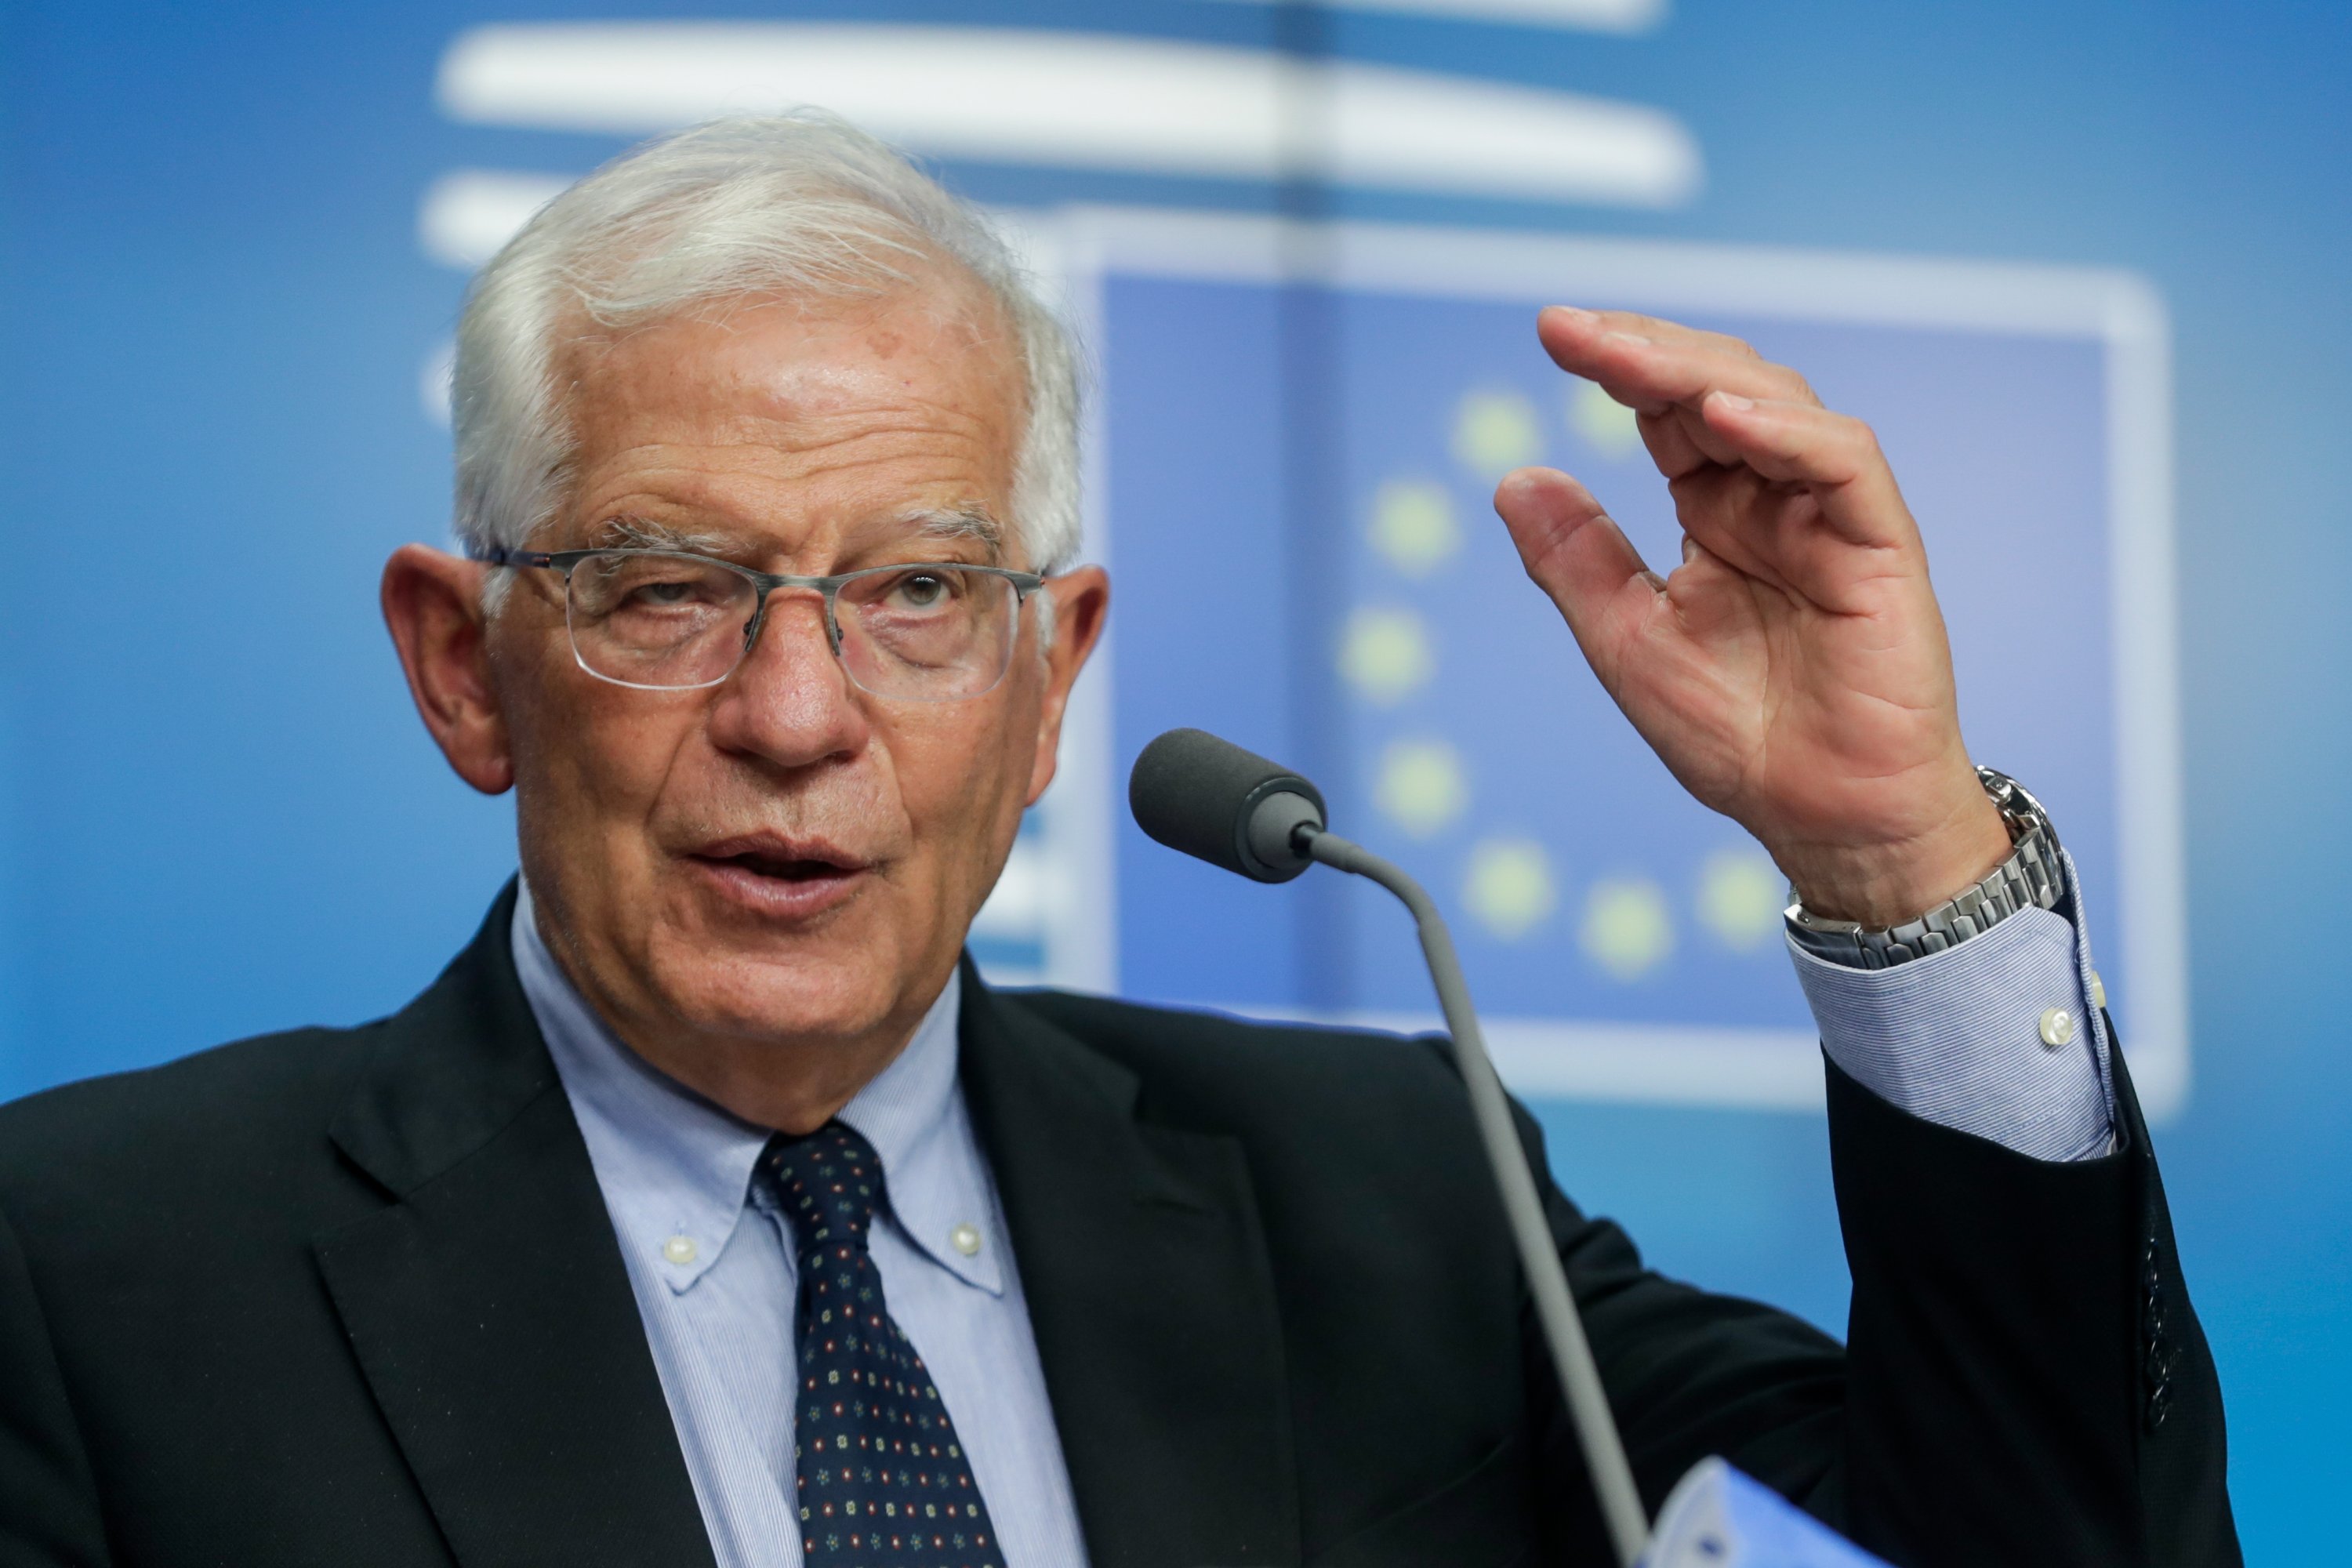 EU has to talk with Taliban before recognition: Borrell